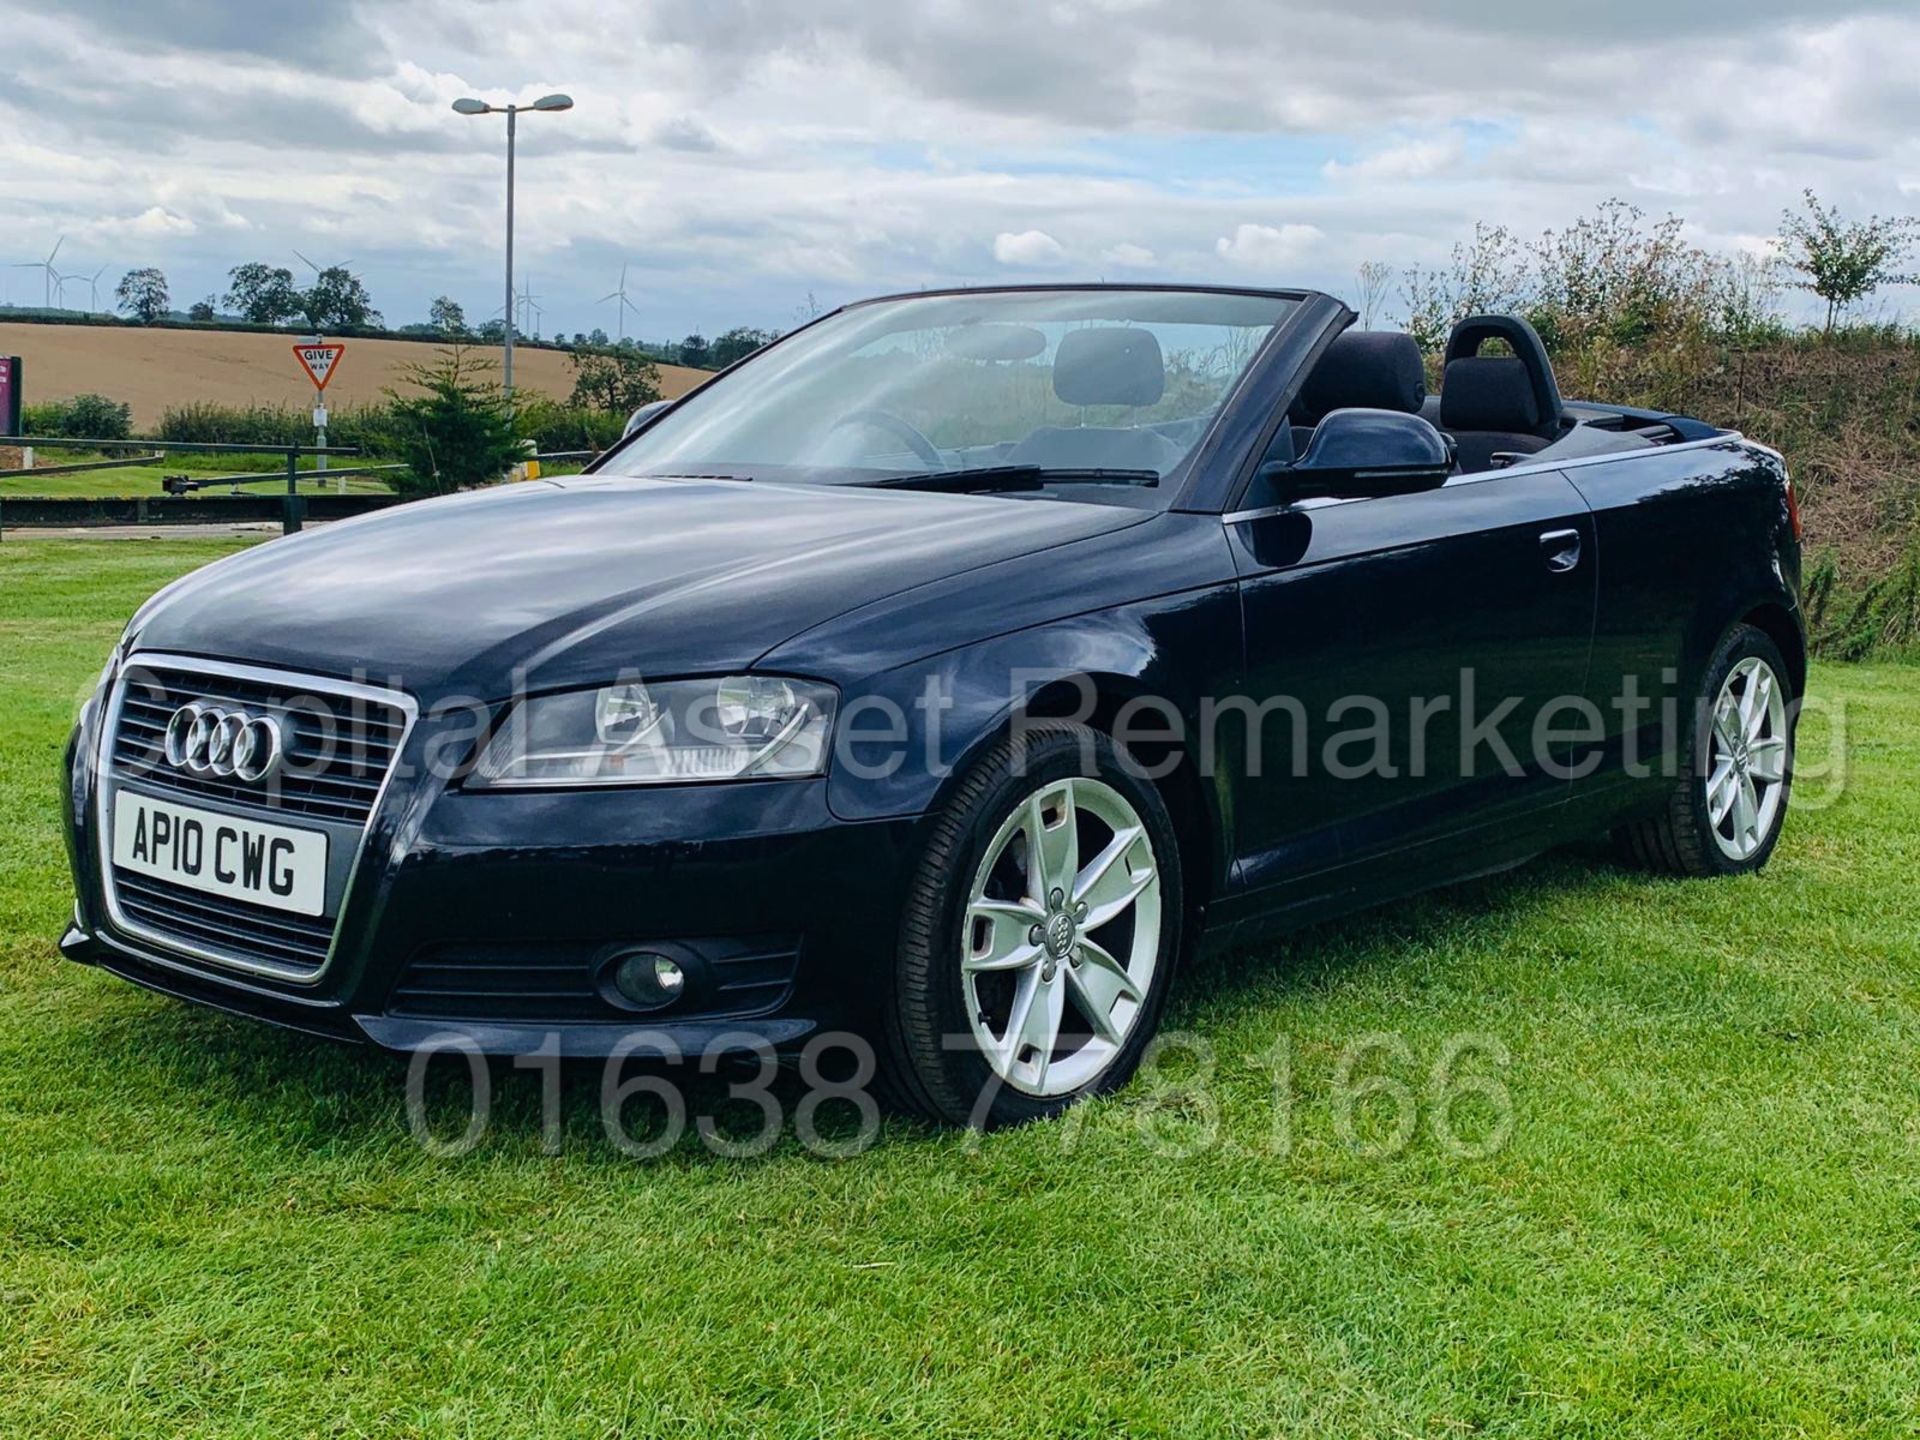 (On Sale) AUDI A3 *CONVERTIBLE / CABRIOLET* SPORT EDITION (2010) '2.0 TDI - 140 BHP - 6 SPEED' - Image 9 of 47